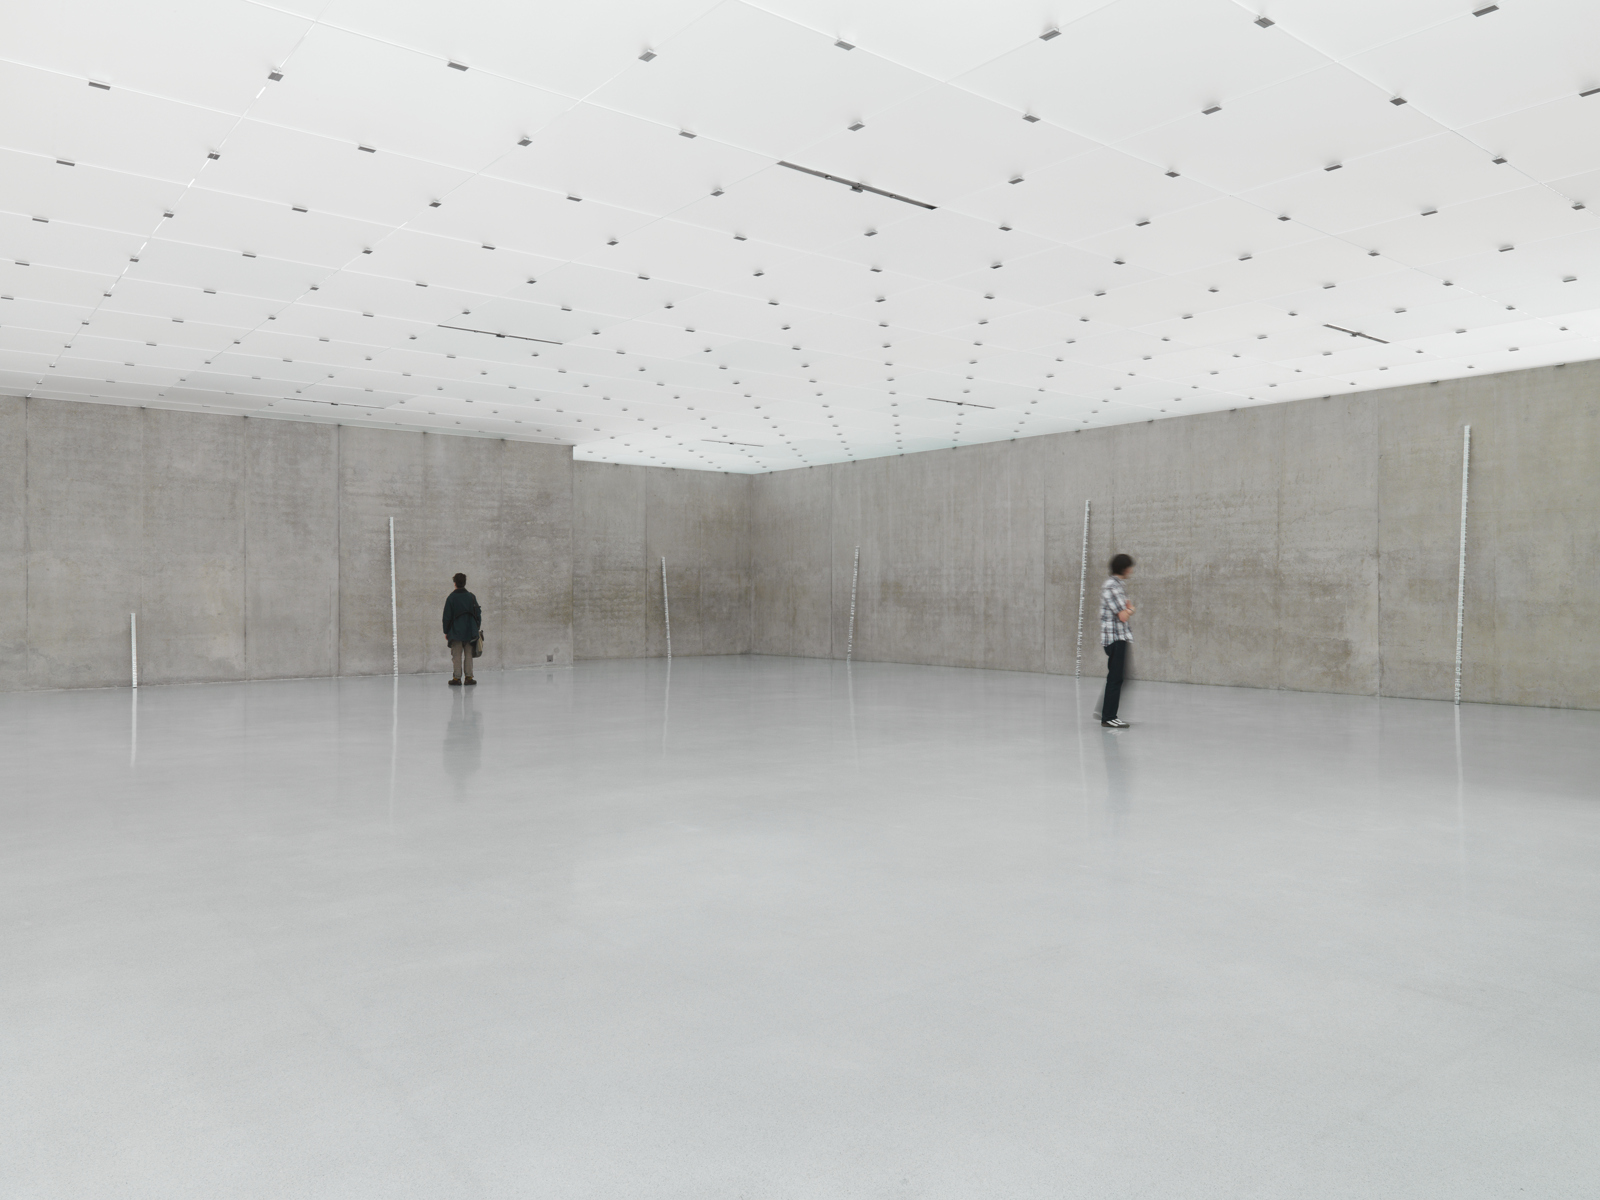 Roni Horn / White Dickinson, exhibition view, "Well and Truly", Kunsthaus Bregenz  / 2010